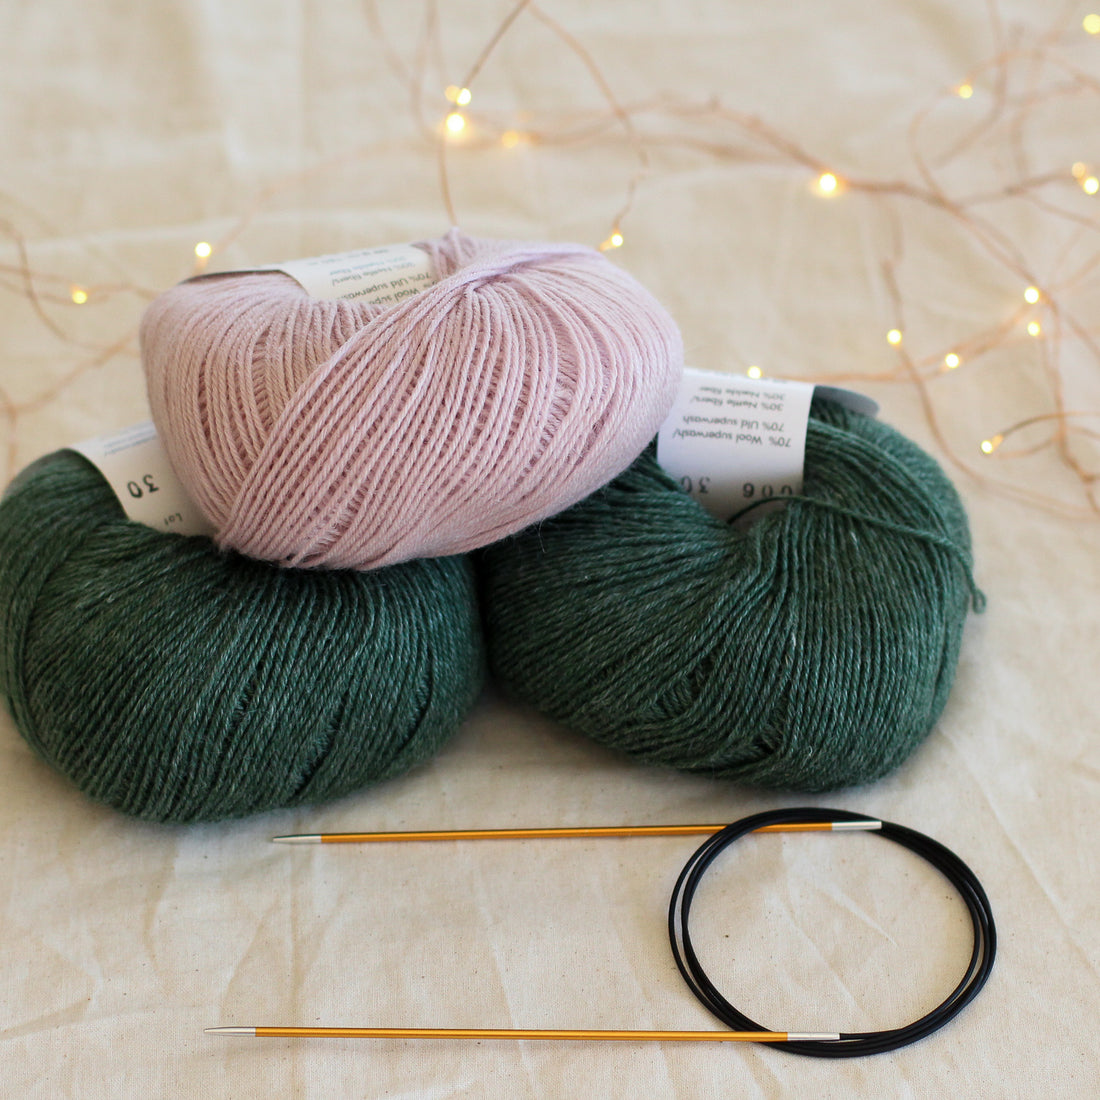 Learn to Knit Socks Kit | Two-Tone